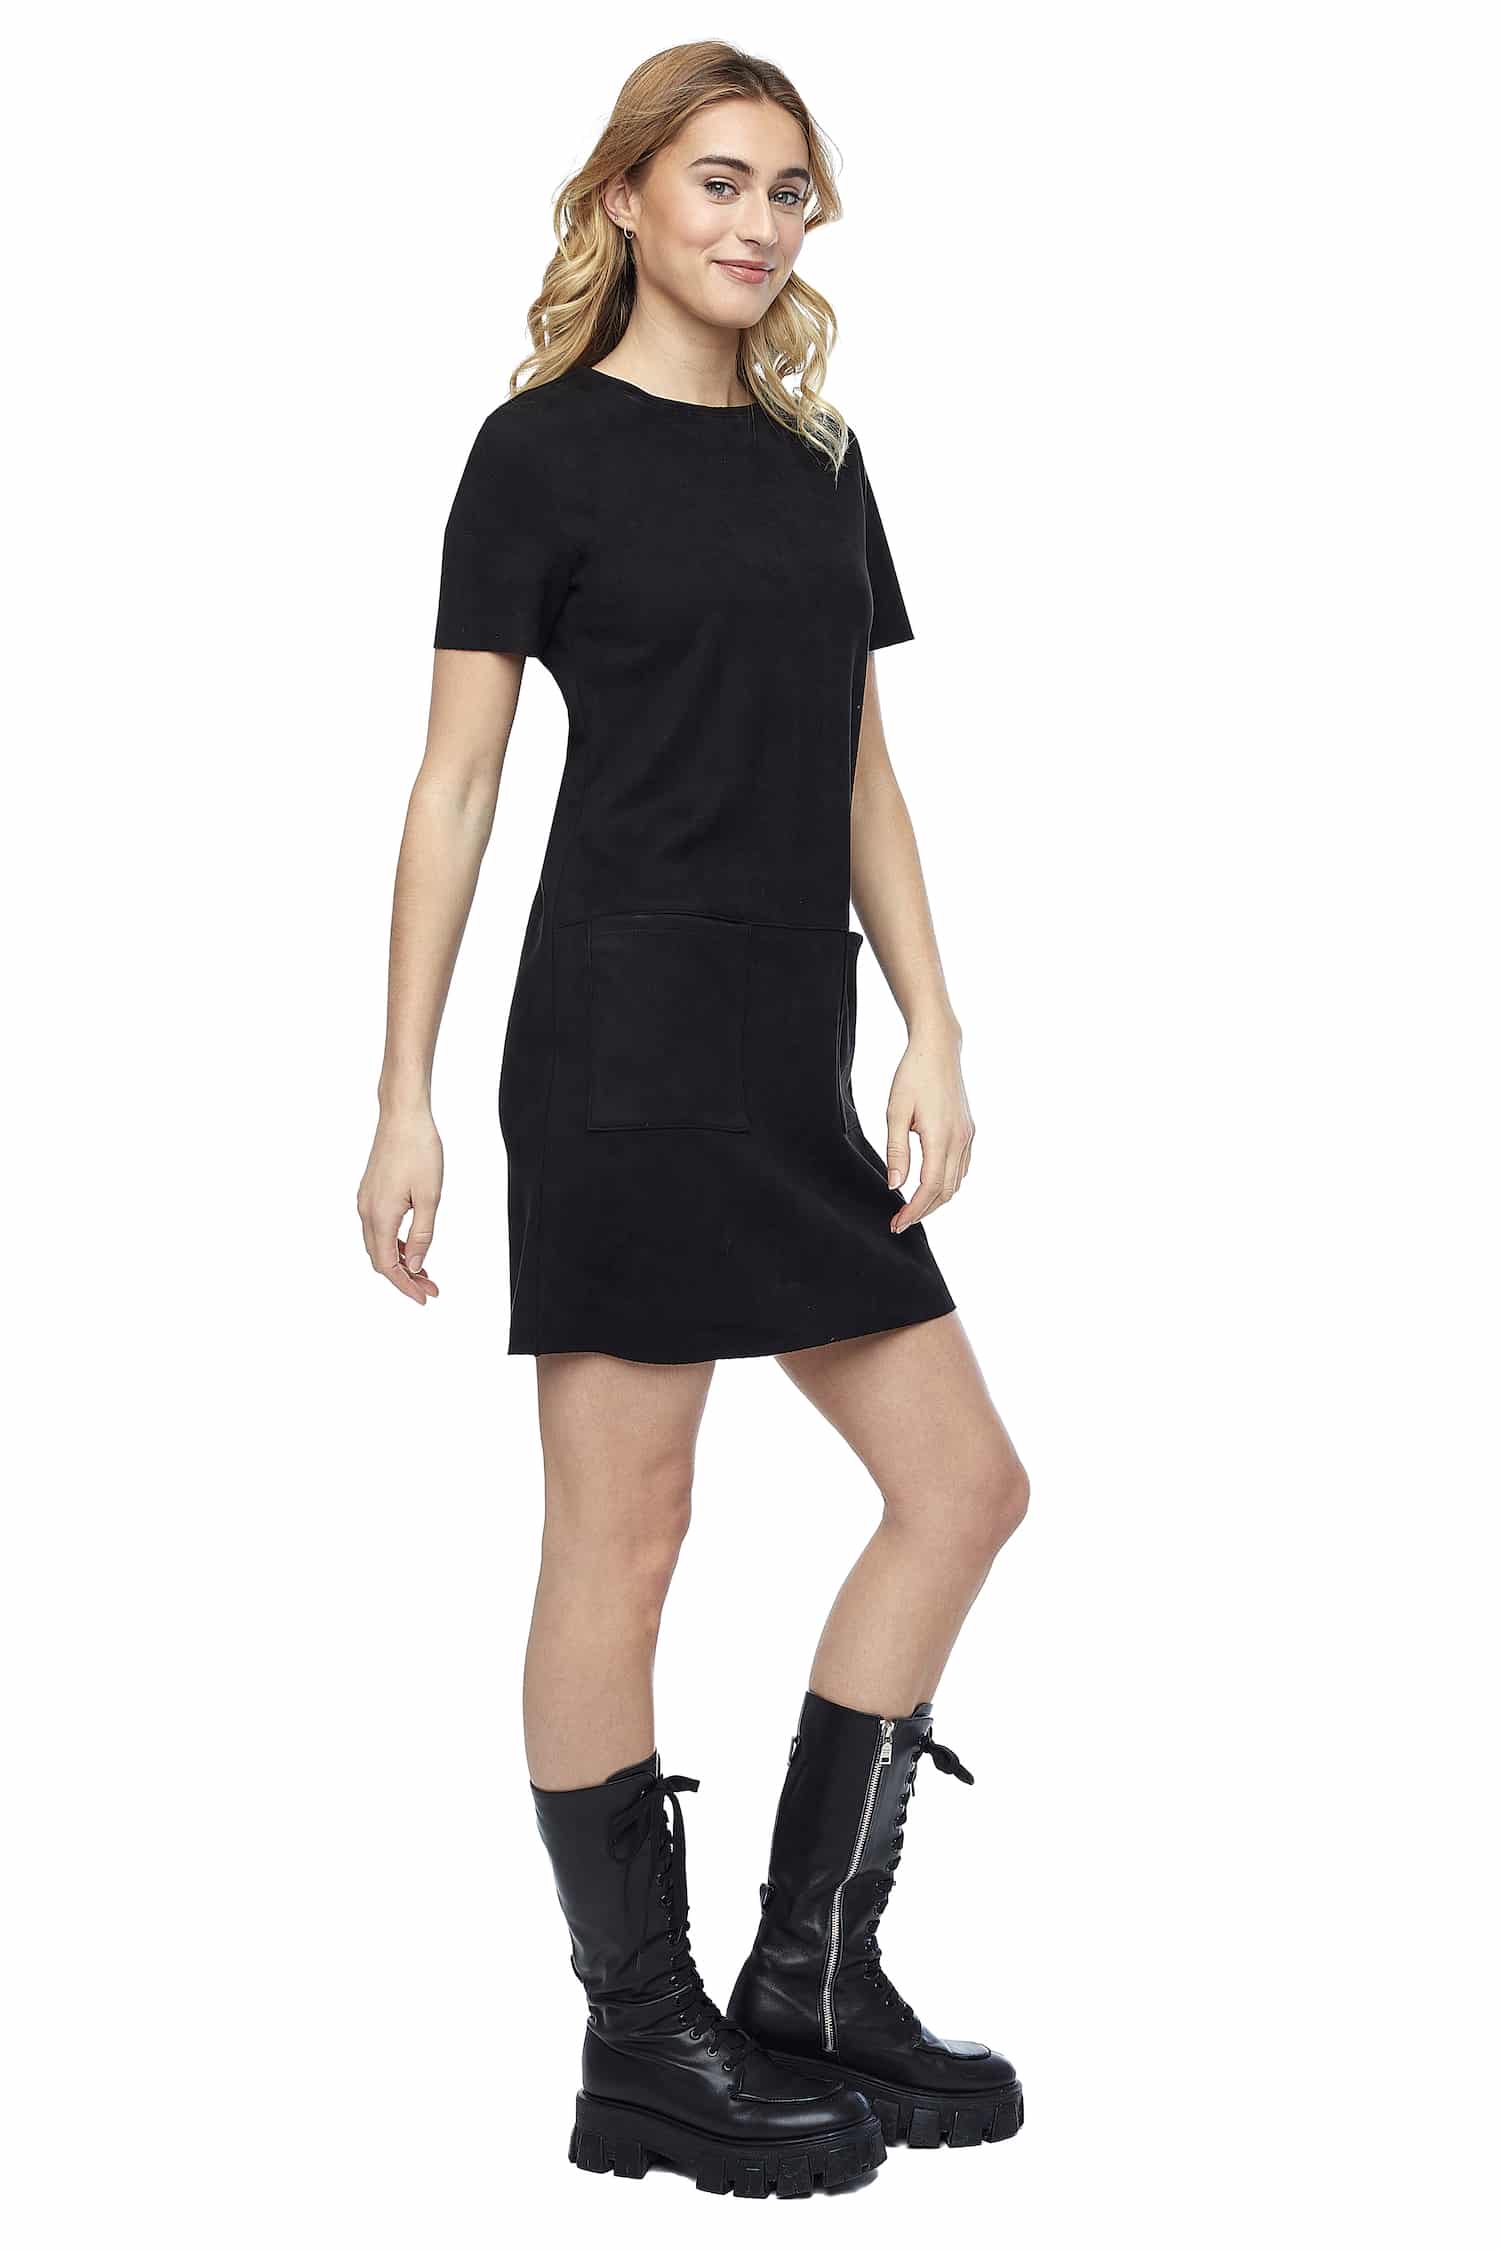 ARIANA FAUX SUEDE SHIFT DRESS - I love Tyler Madison